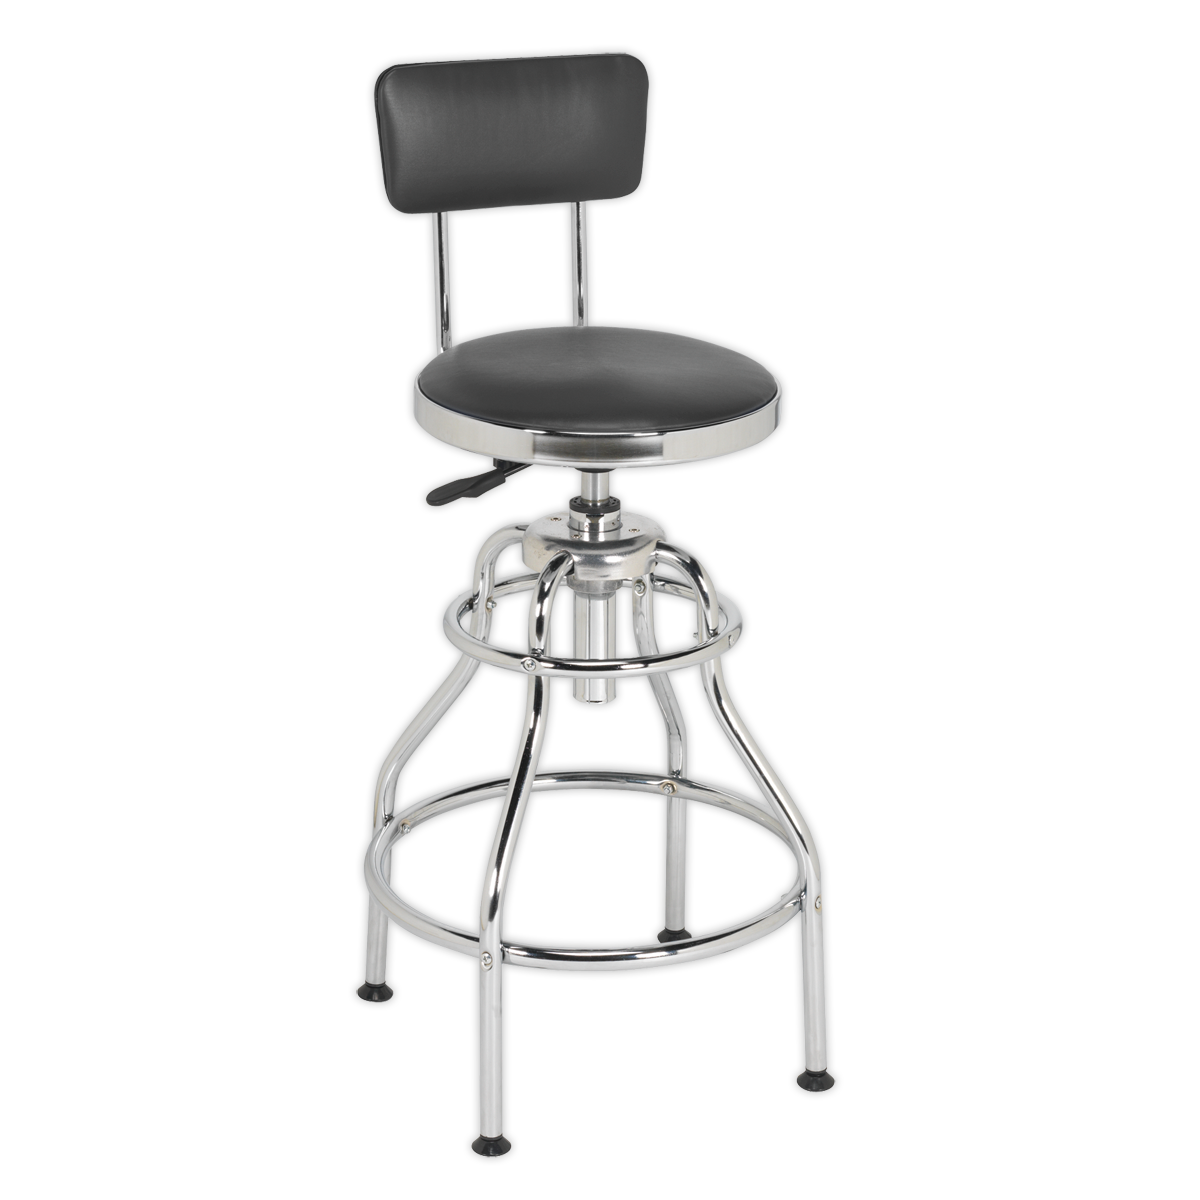 SEALEY - SCR14 Workshop Stool Pneumatic with Adjustable Height Swivel Seat & Back Rest